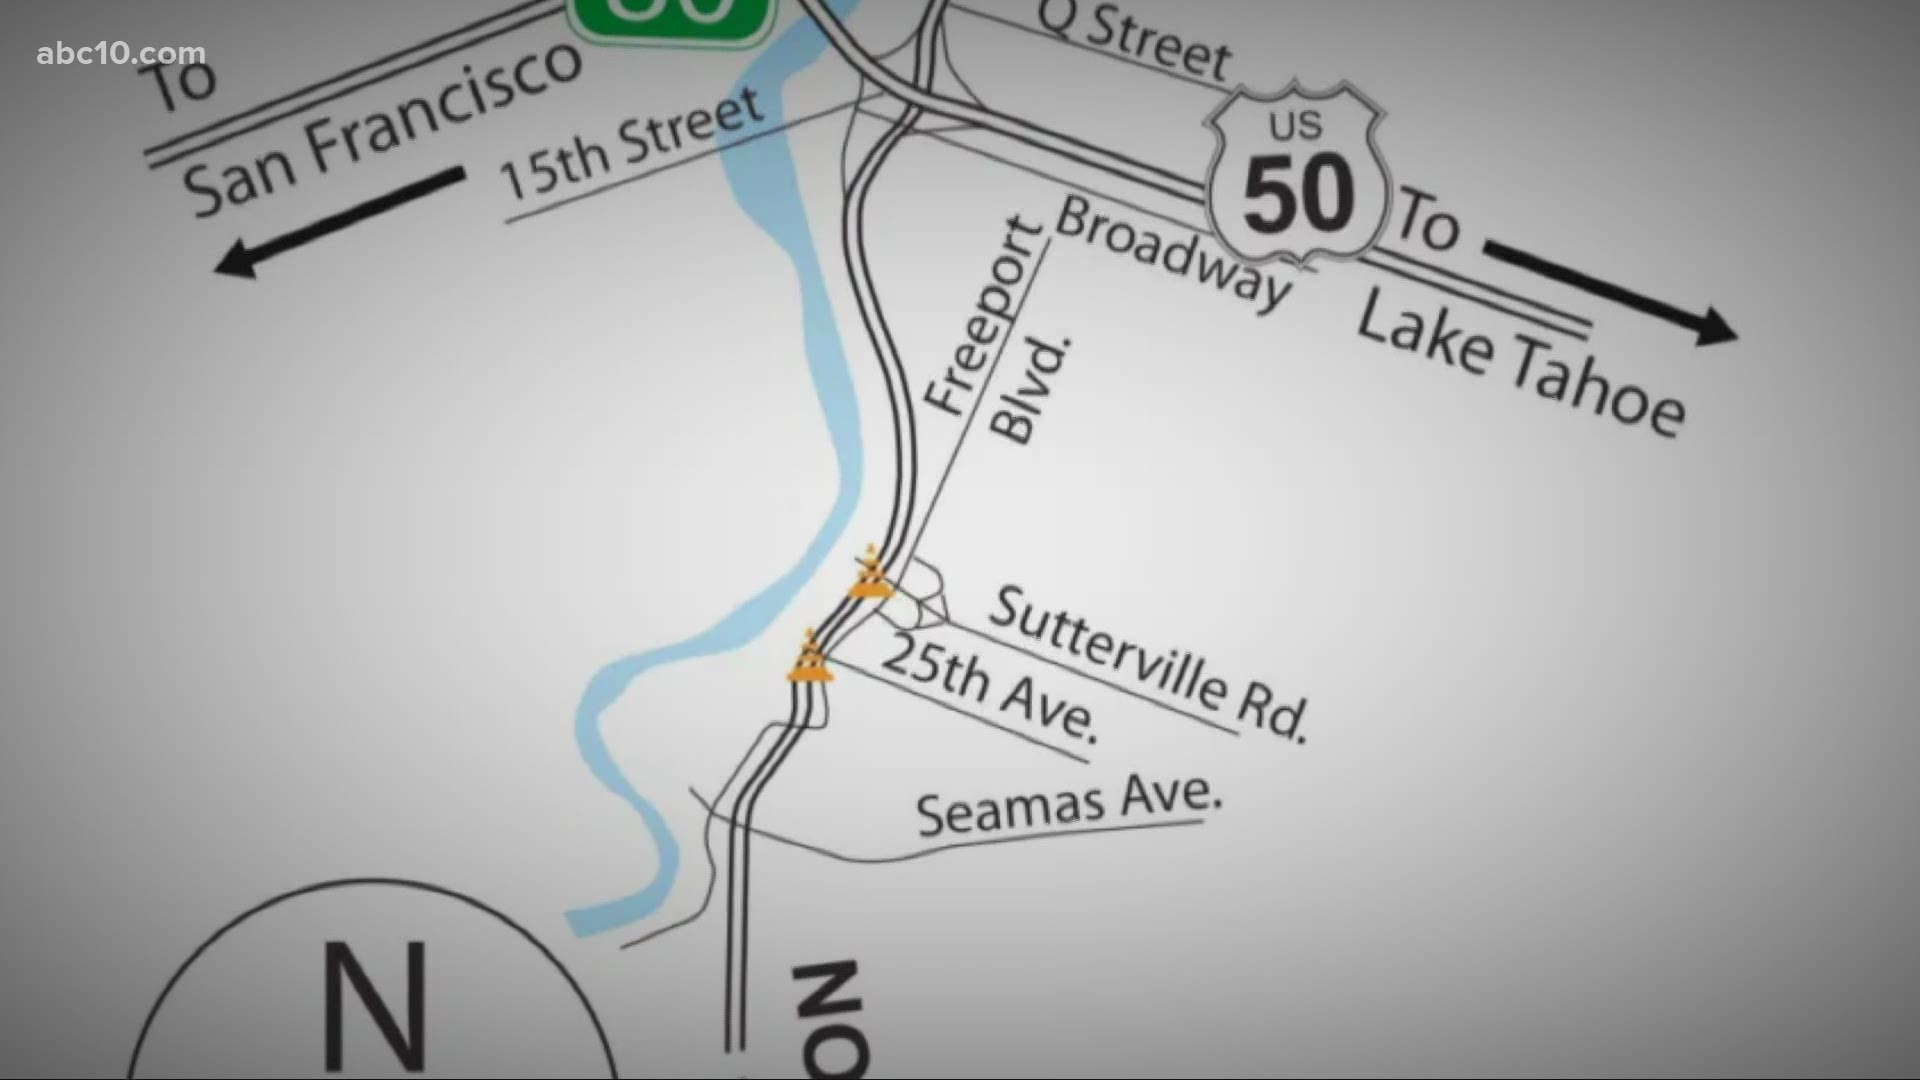 Caltrans says that the ramps will be closed at Sutterville Road and W Street going to southbound I-5.